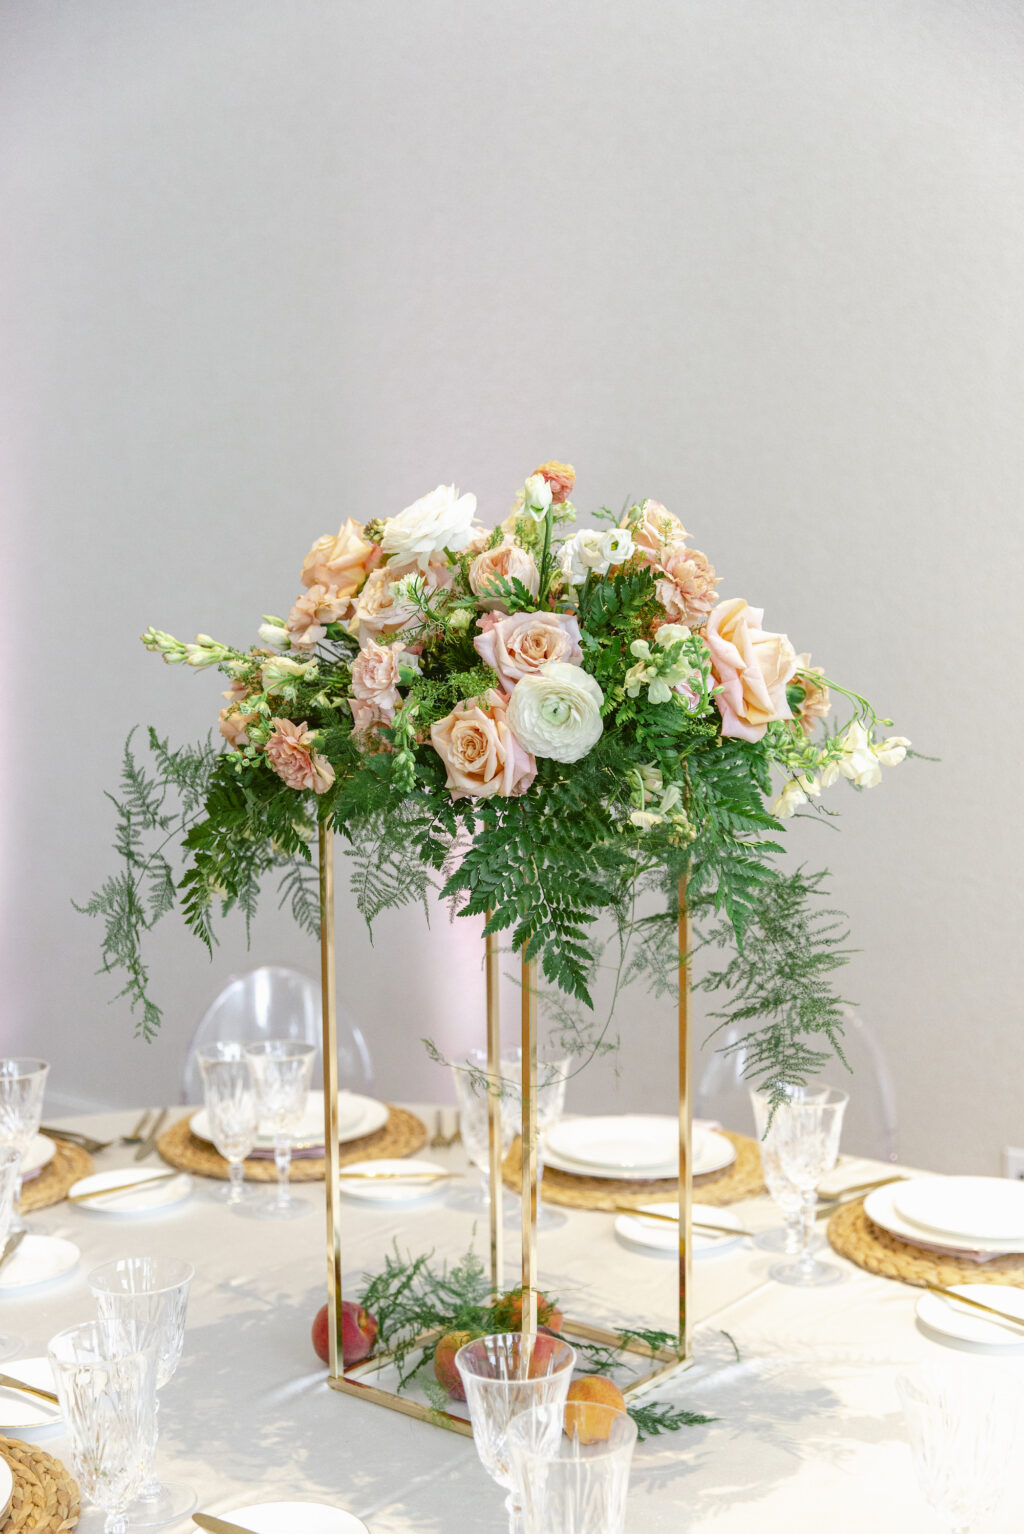 Romantic Tall Gold Stand with Ferns, Greenery, Peach Roses, Fruit Wedding Reception Centerpiece Ideas